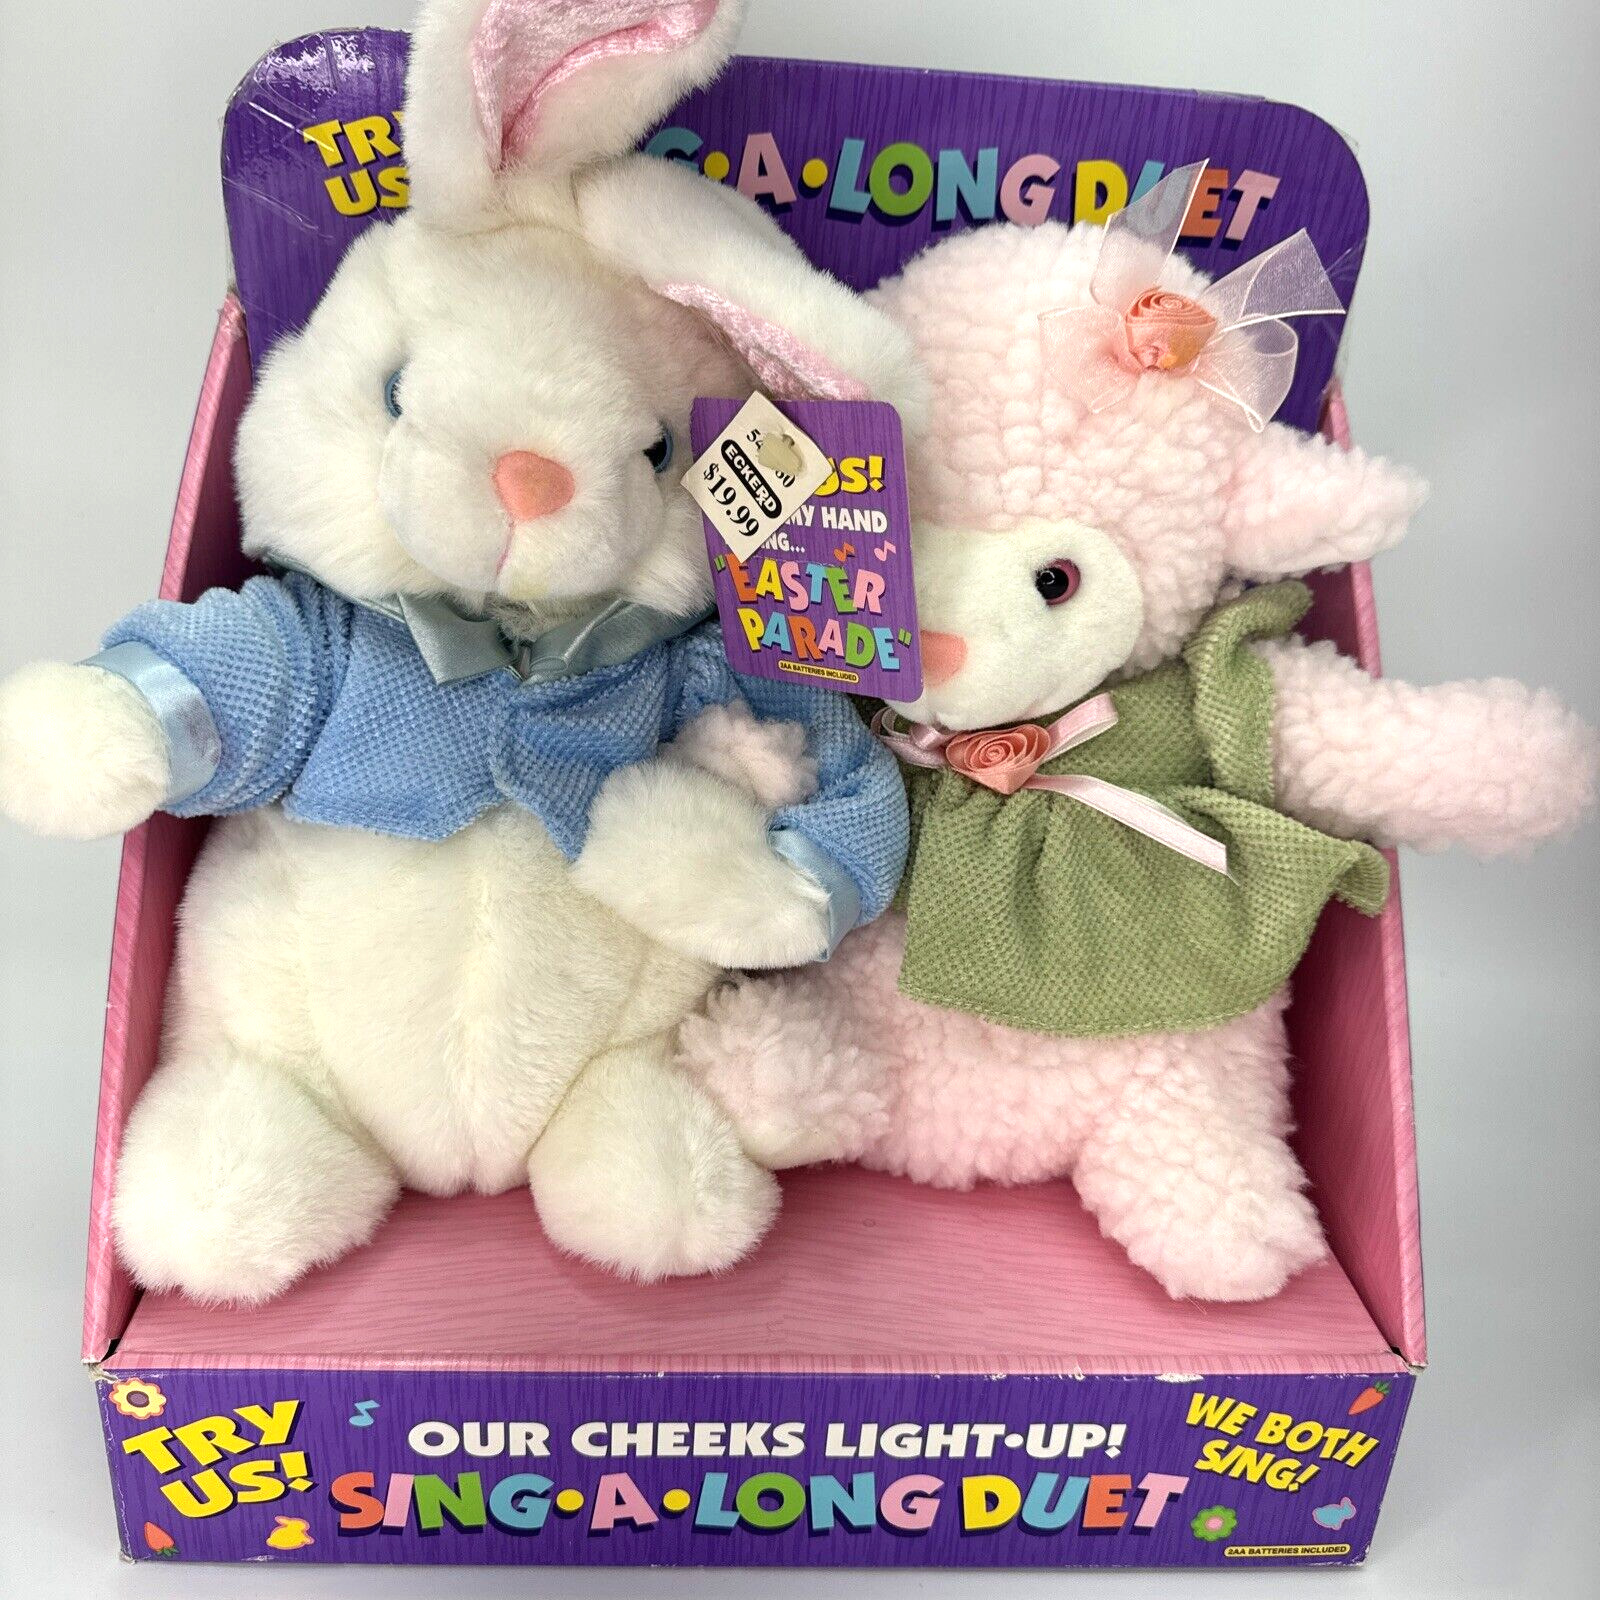 Vintage DanDee Musical Animated Bunny Lamb Sing a Long Duet Easter Parade